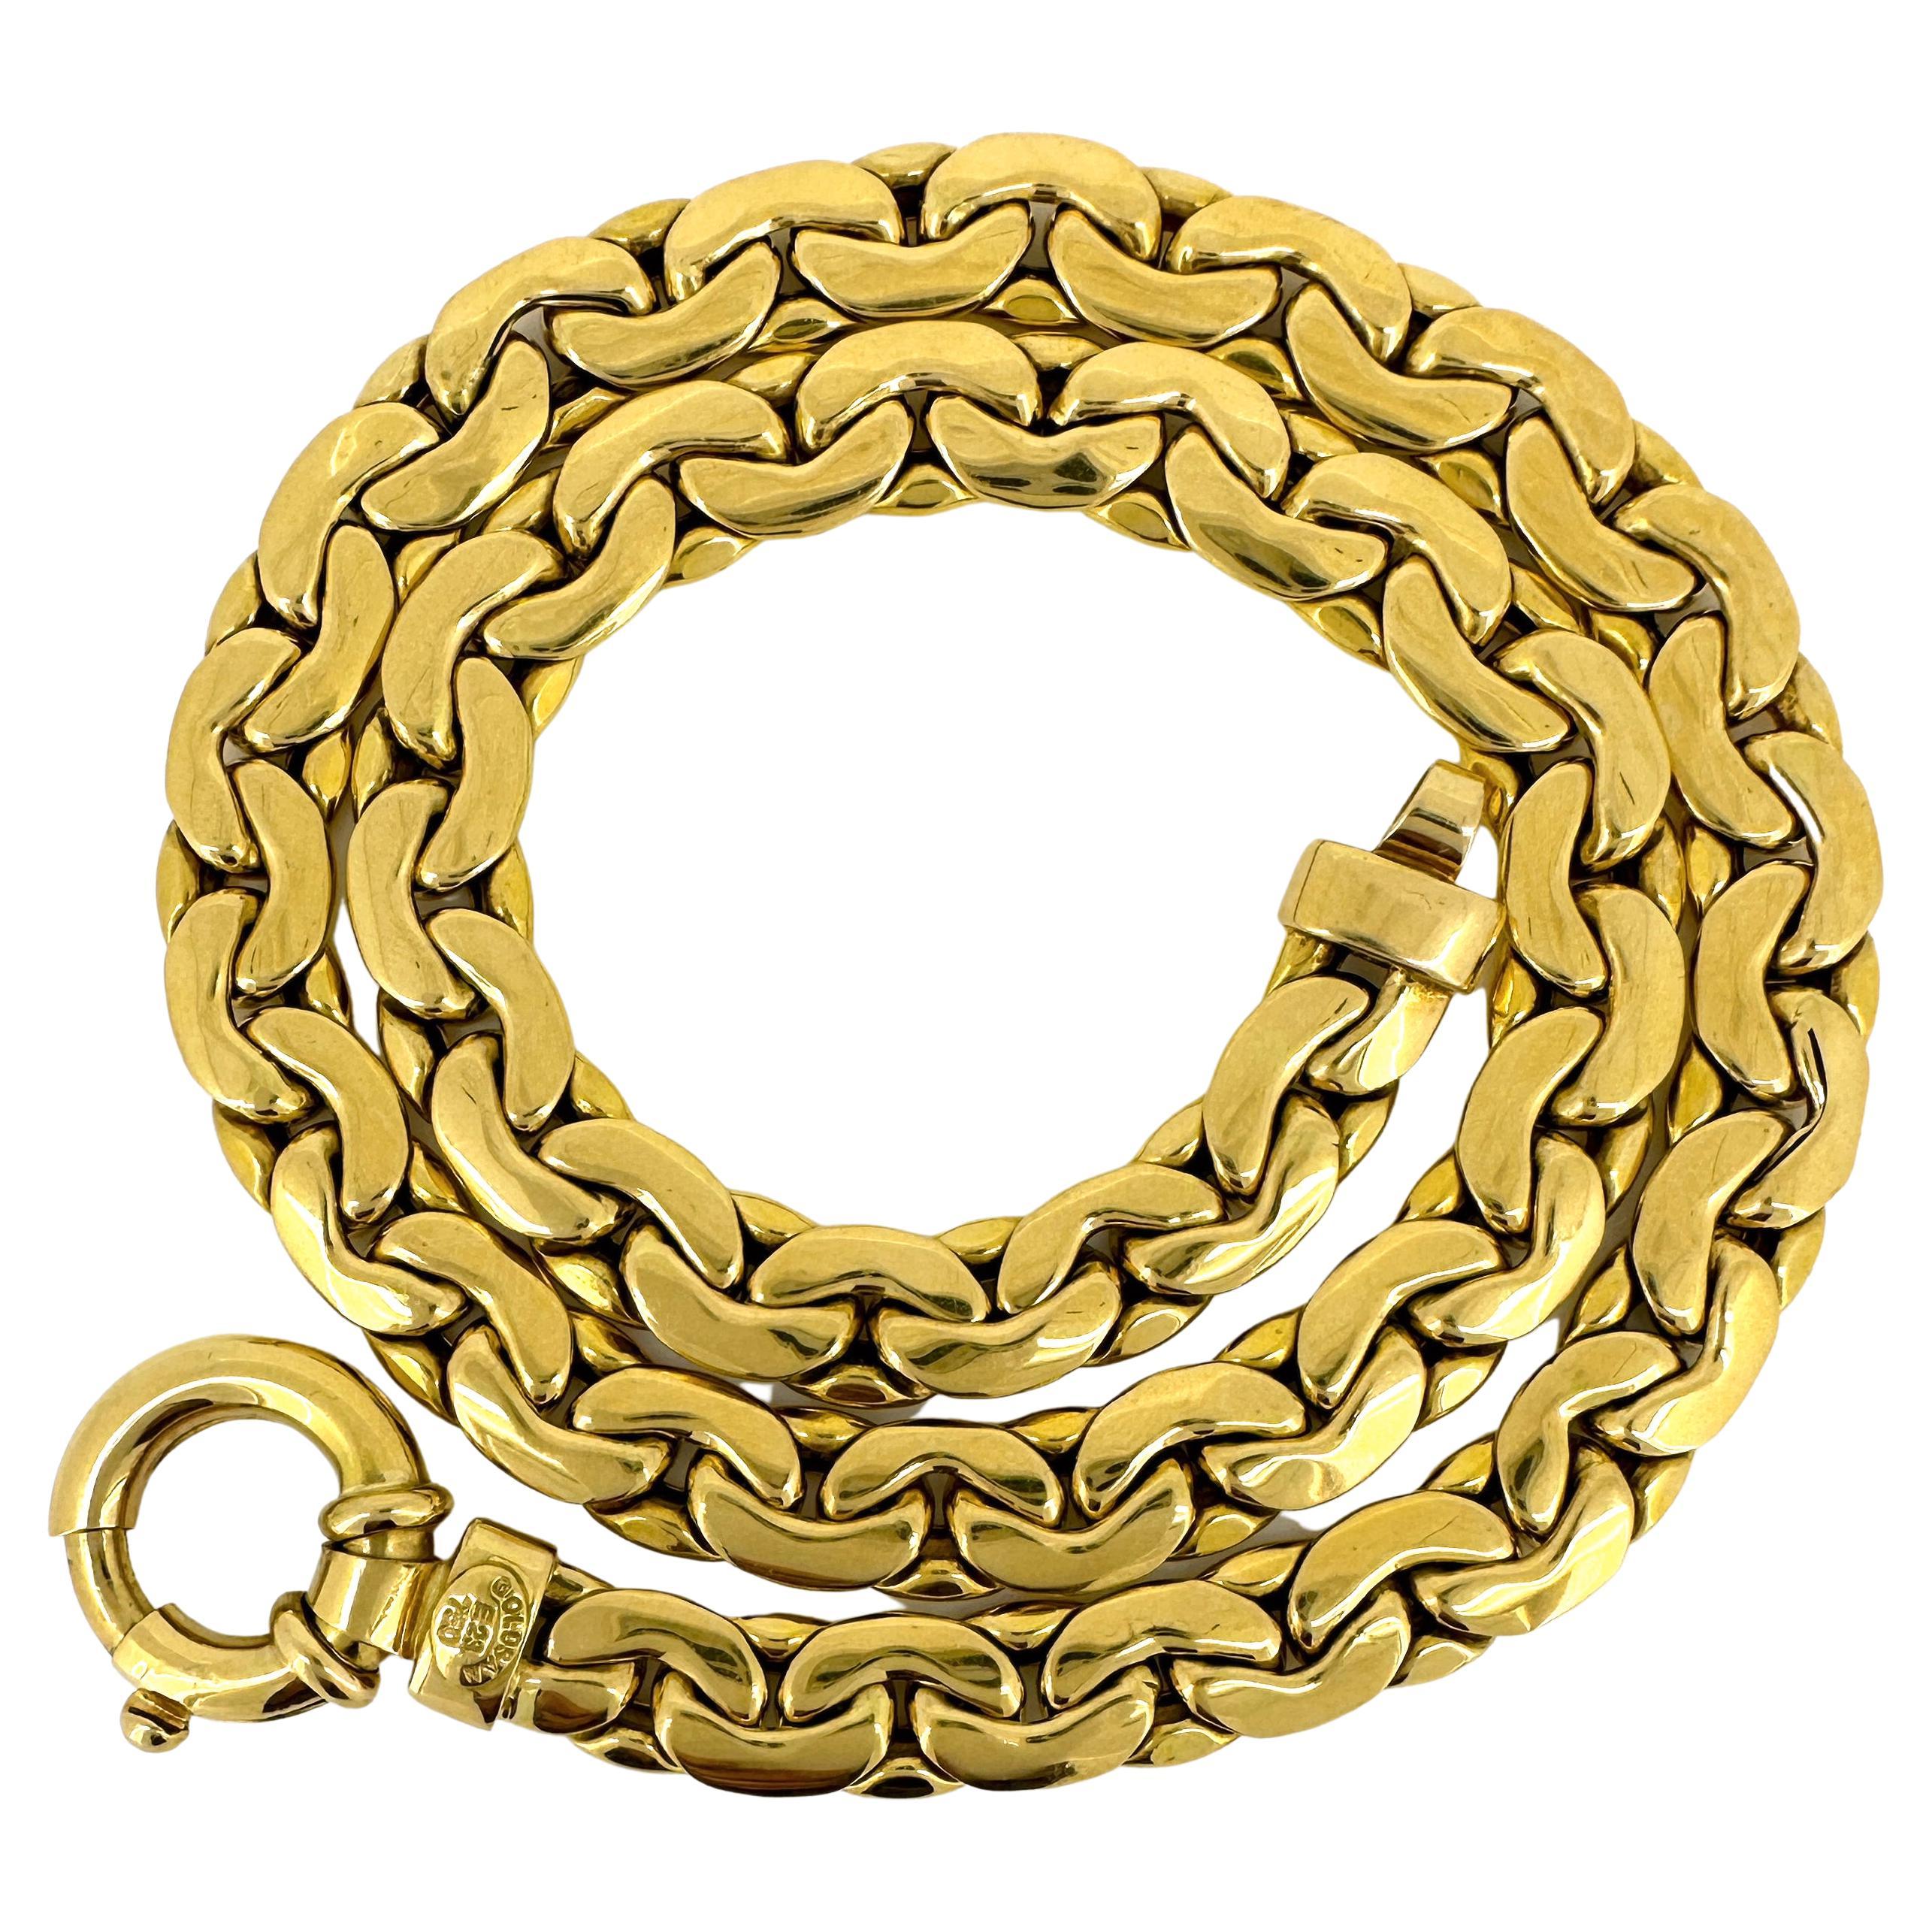 Princess Length Fancy C-Link Chain Necklace in Polished & Satin 18K Yellow Gold